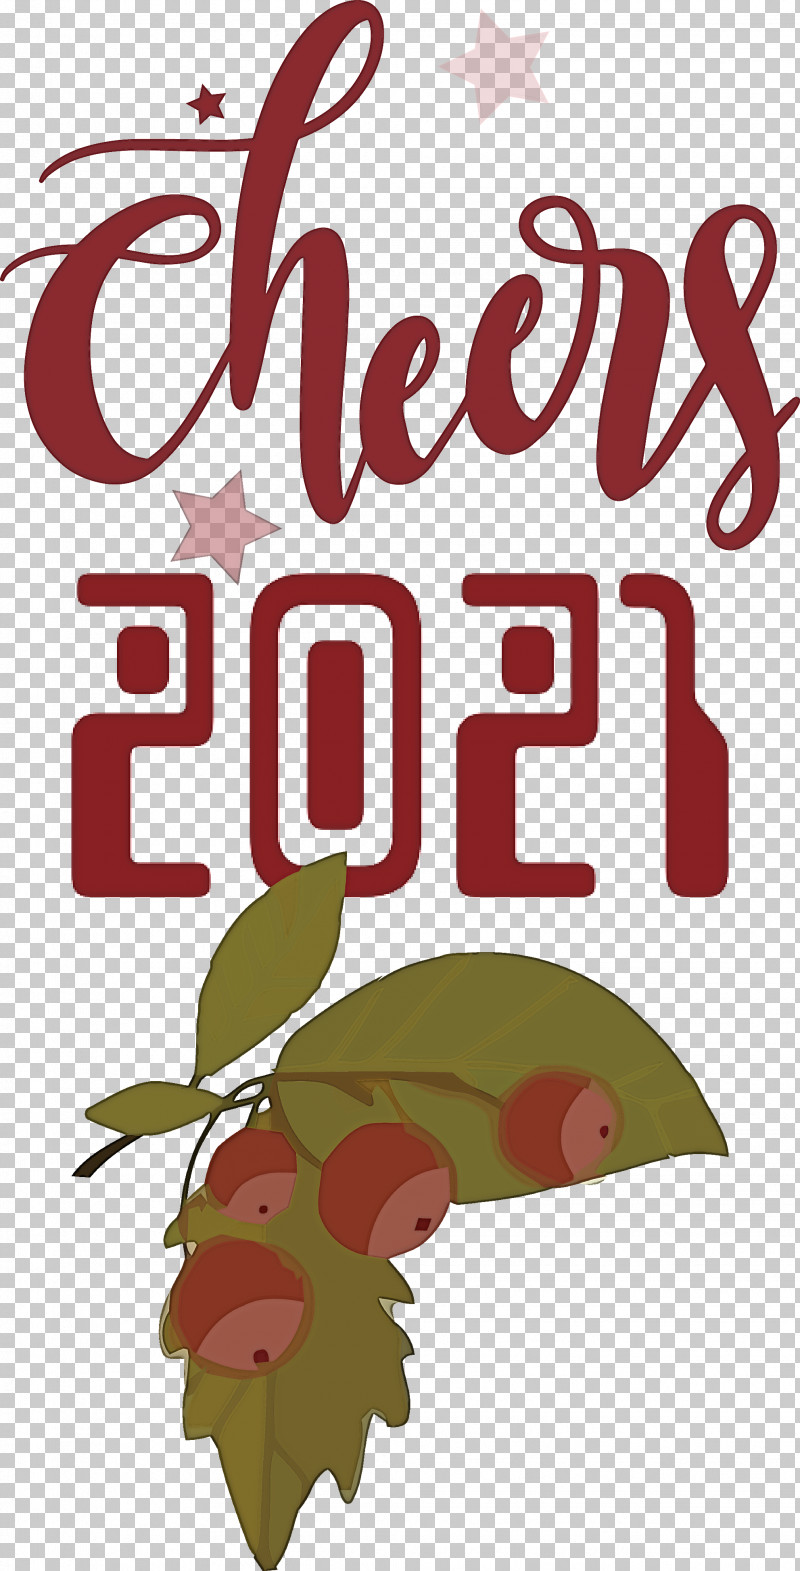 Cheers 2021 New Year Cheers.2021 New Year PNG, Clipart, Cheers 2021 New Year, Editing, Free, Poster, Silhouette Free PNG Download